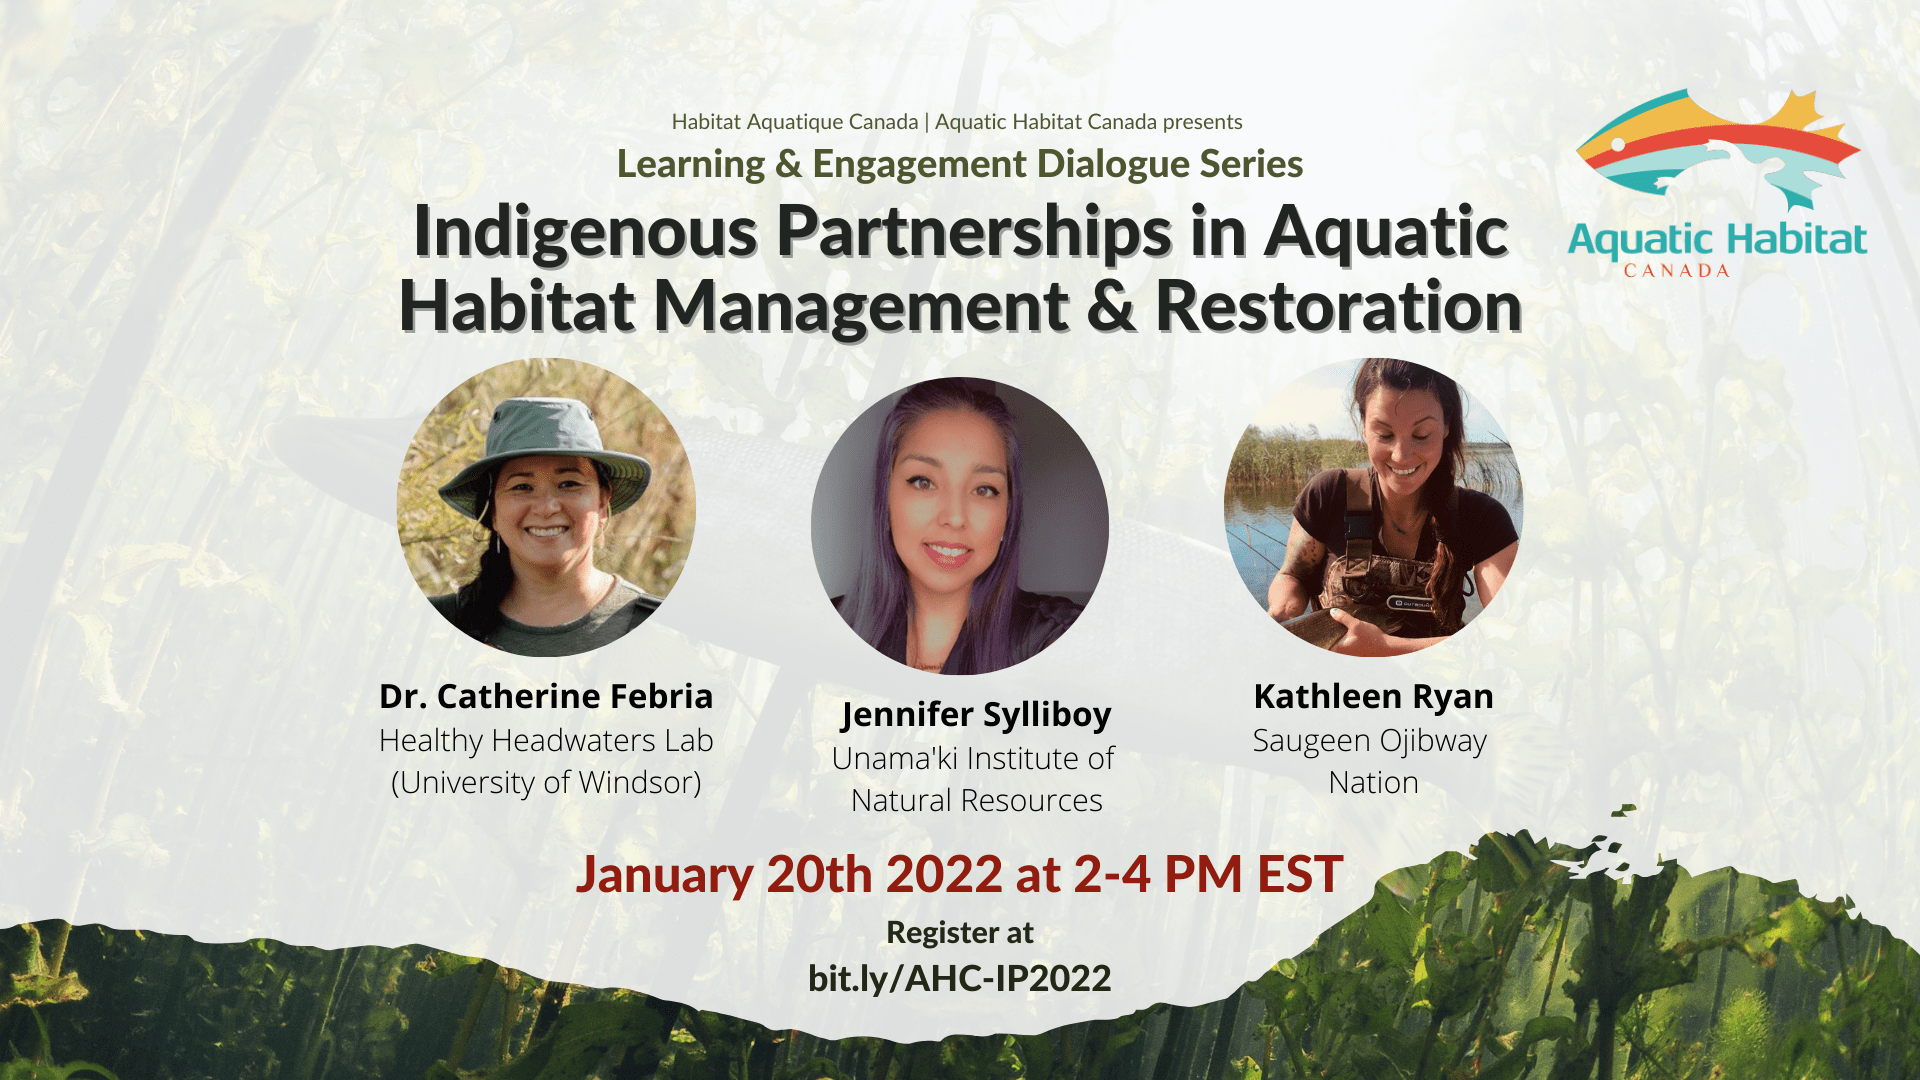 Promotional Poster for "Indigenous Partnerships in Aquatic Habitat Management and Restoration", hosted by Aquatic Habitat Canada.